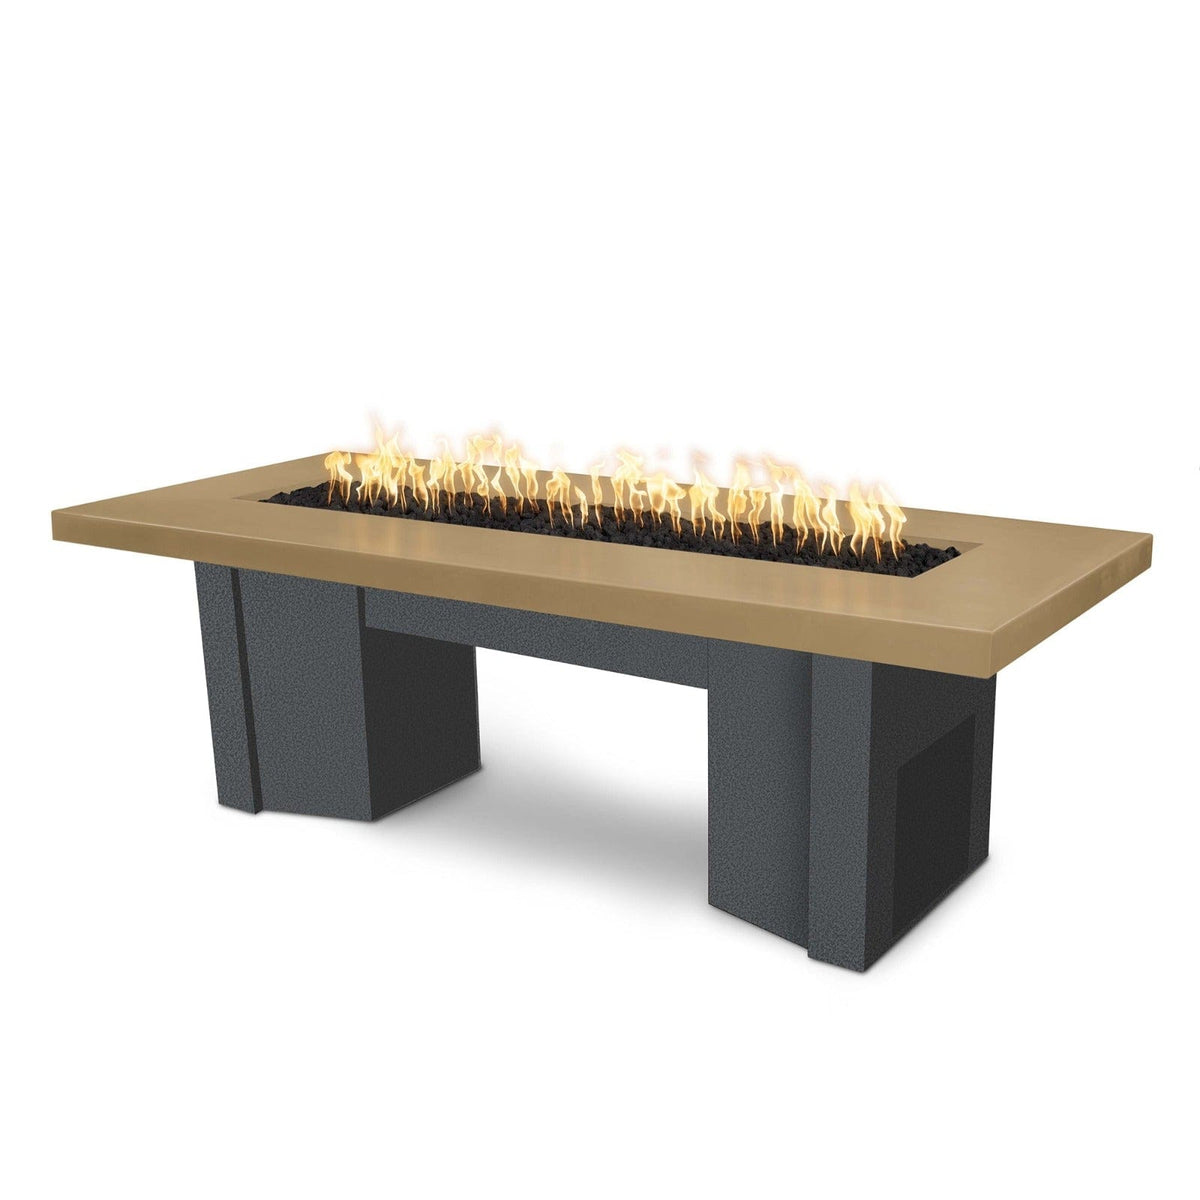 The Outdoor Plus Fire Features Brown (-BRN) / Silver Vein Powder Coated Steel (-SLV) The Outdoor Plus 78&quot; Alameda Fire Table Smooth Concrete in Natural Gas - 110V Plug &amp; Play Electronic Ignition / OPT-ALMGFRC78EKIT-NG